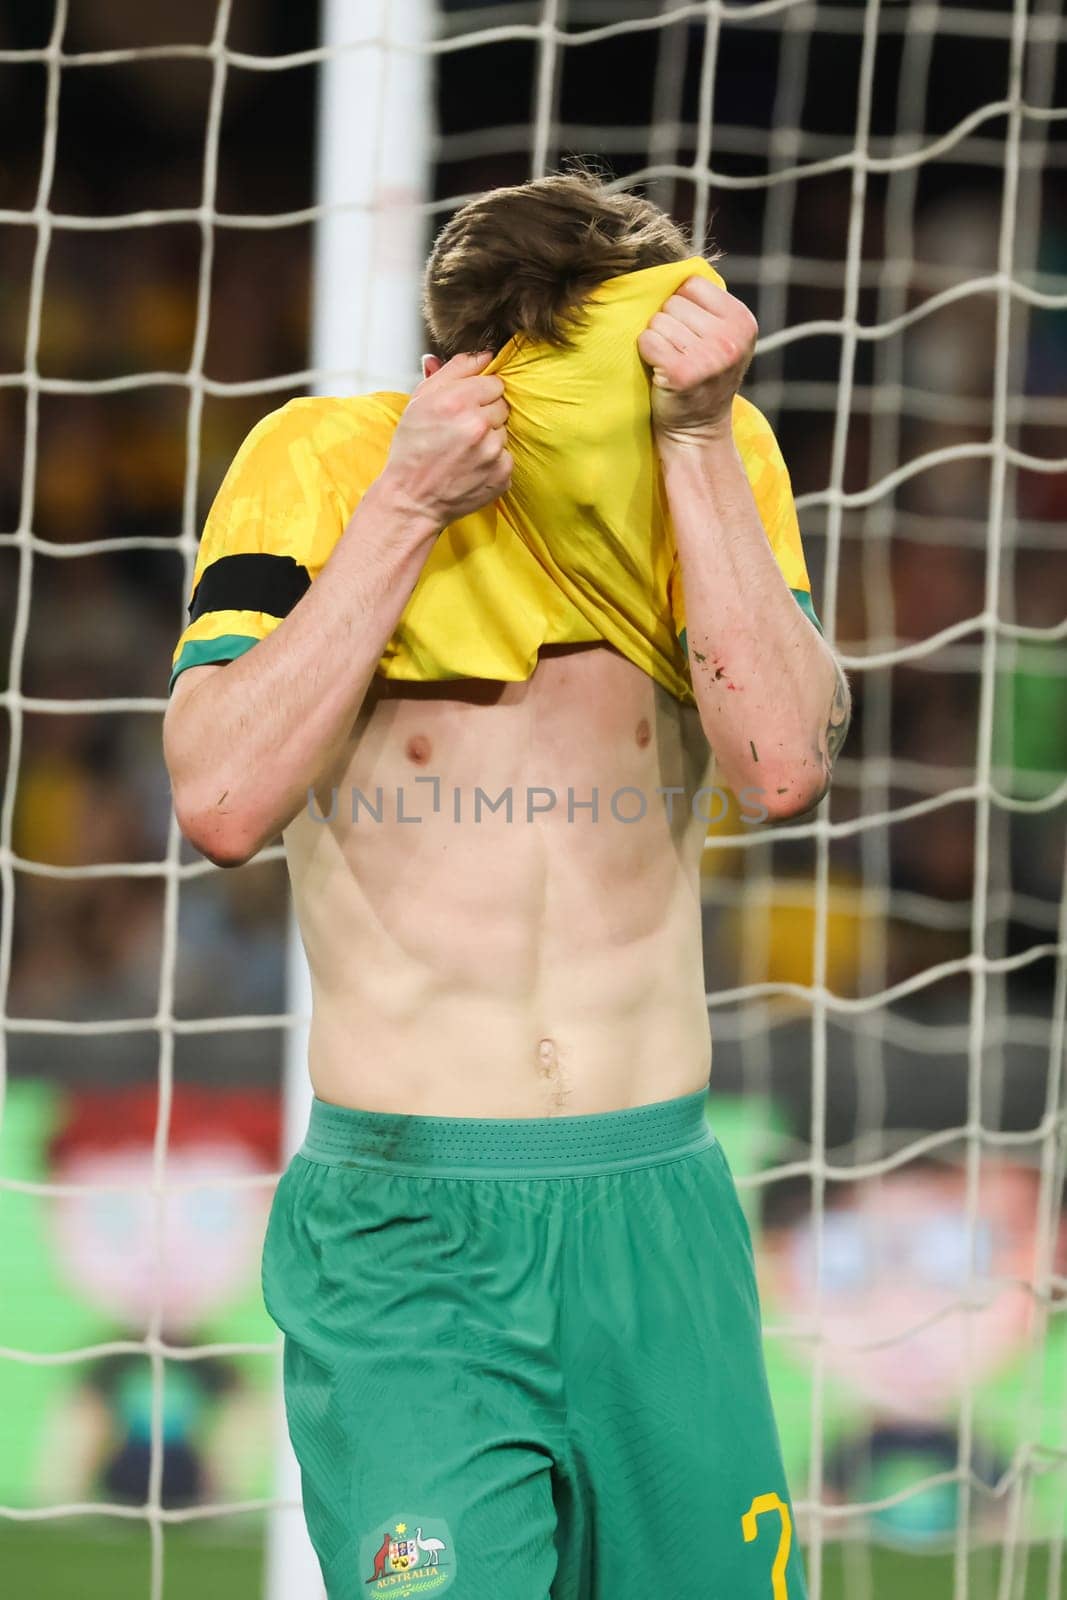 MELBOURNE, AUSTRALIA - MARCH 28: Connor Metcalfe of Australia during an international friendly match between the Australia Socceroos and Ecuador at Marvel Stadium on March 28, 2023 in Melbourne, Australia.